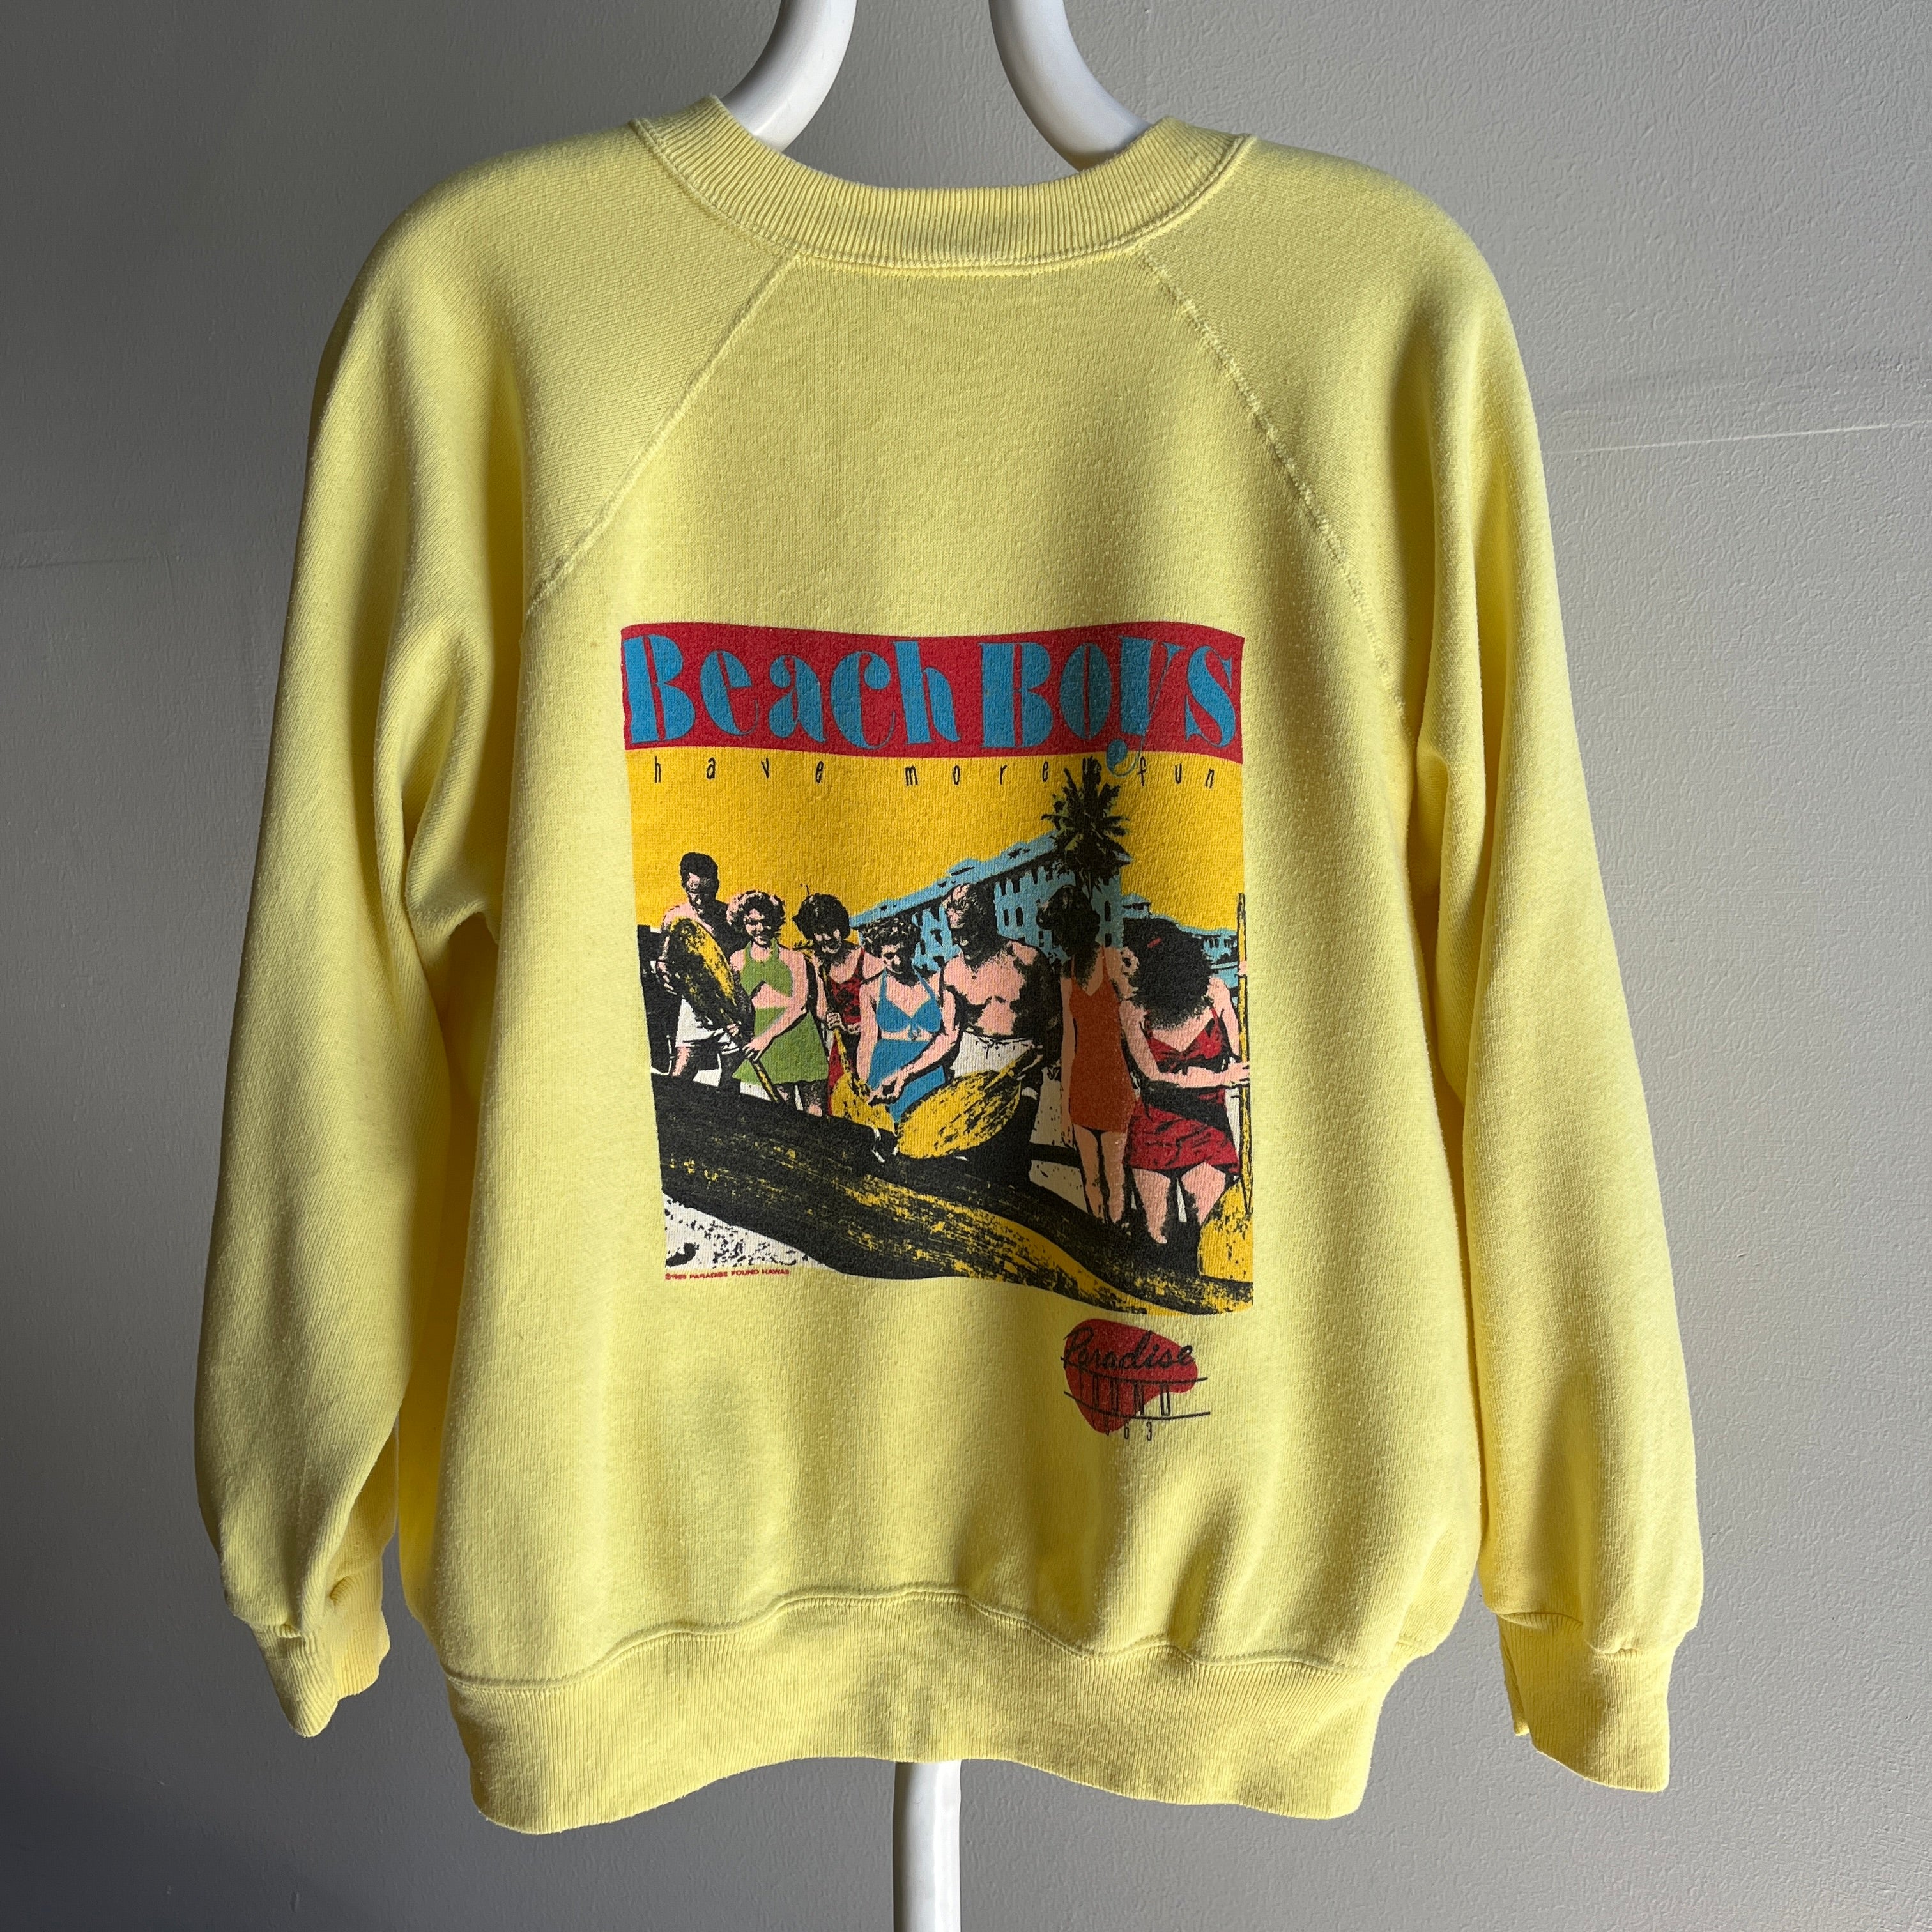 1985 Beach Boys Have More Fun - Paradise Found 1963 - Front and Back Sweatshirt